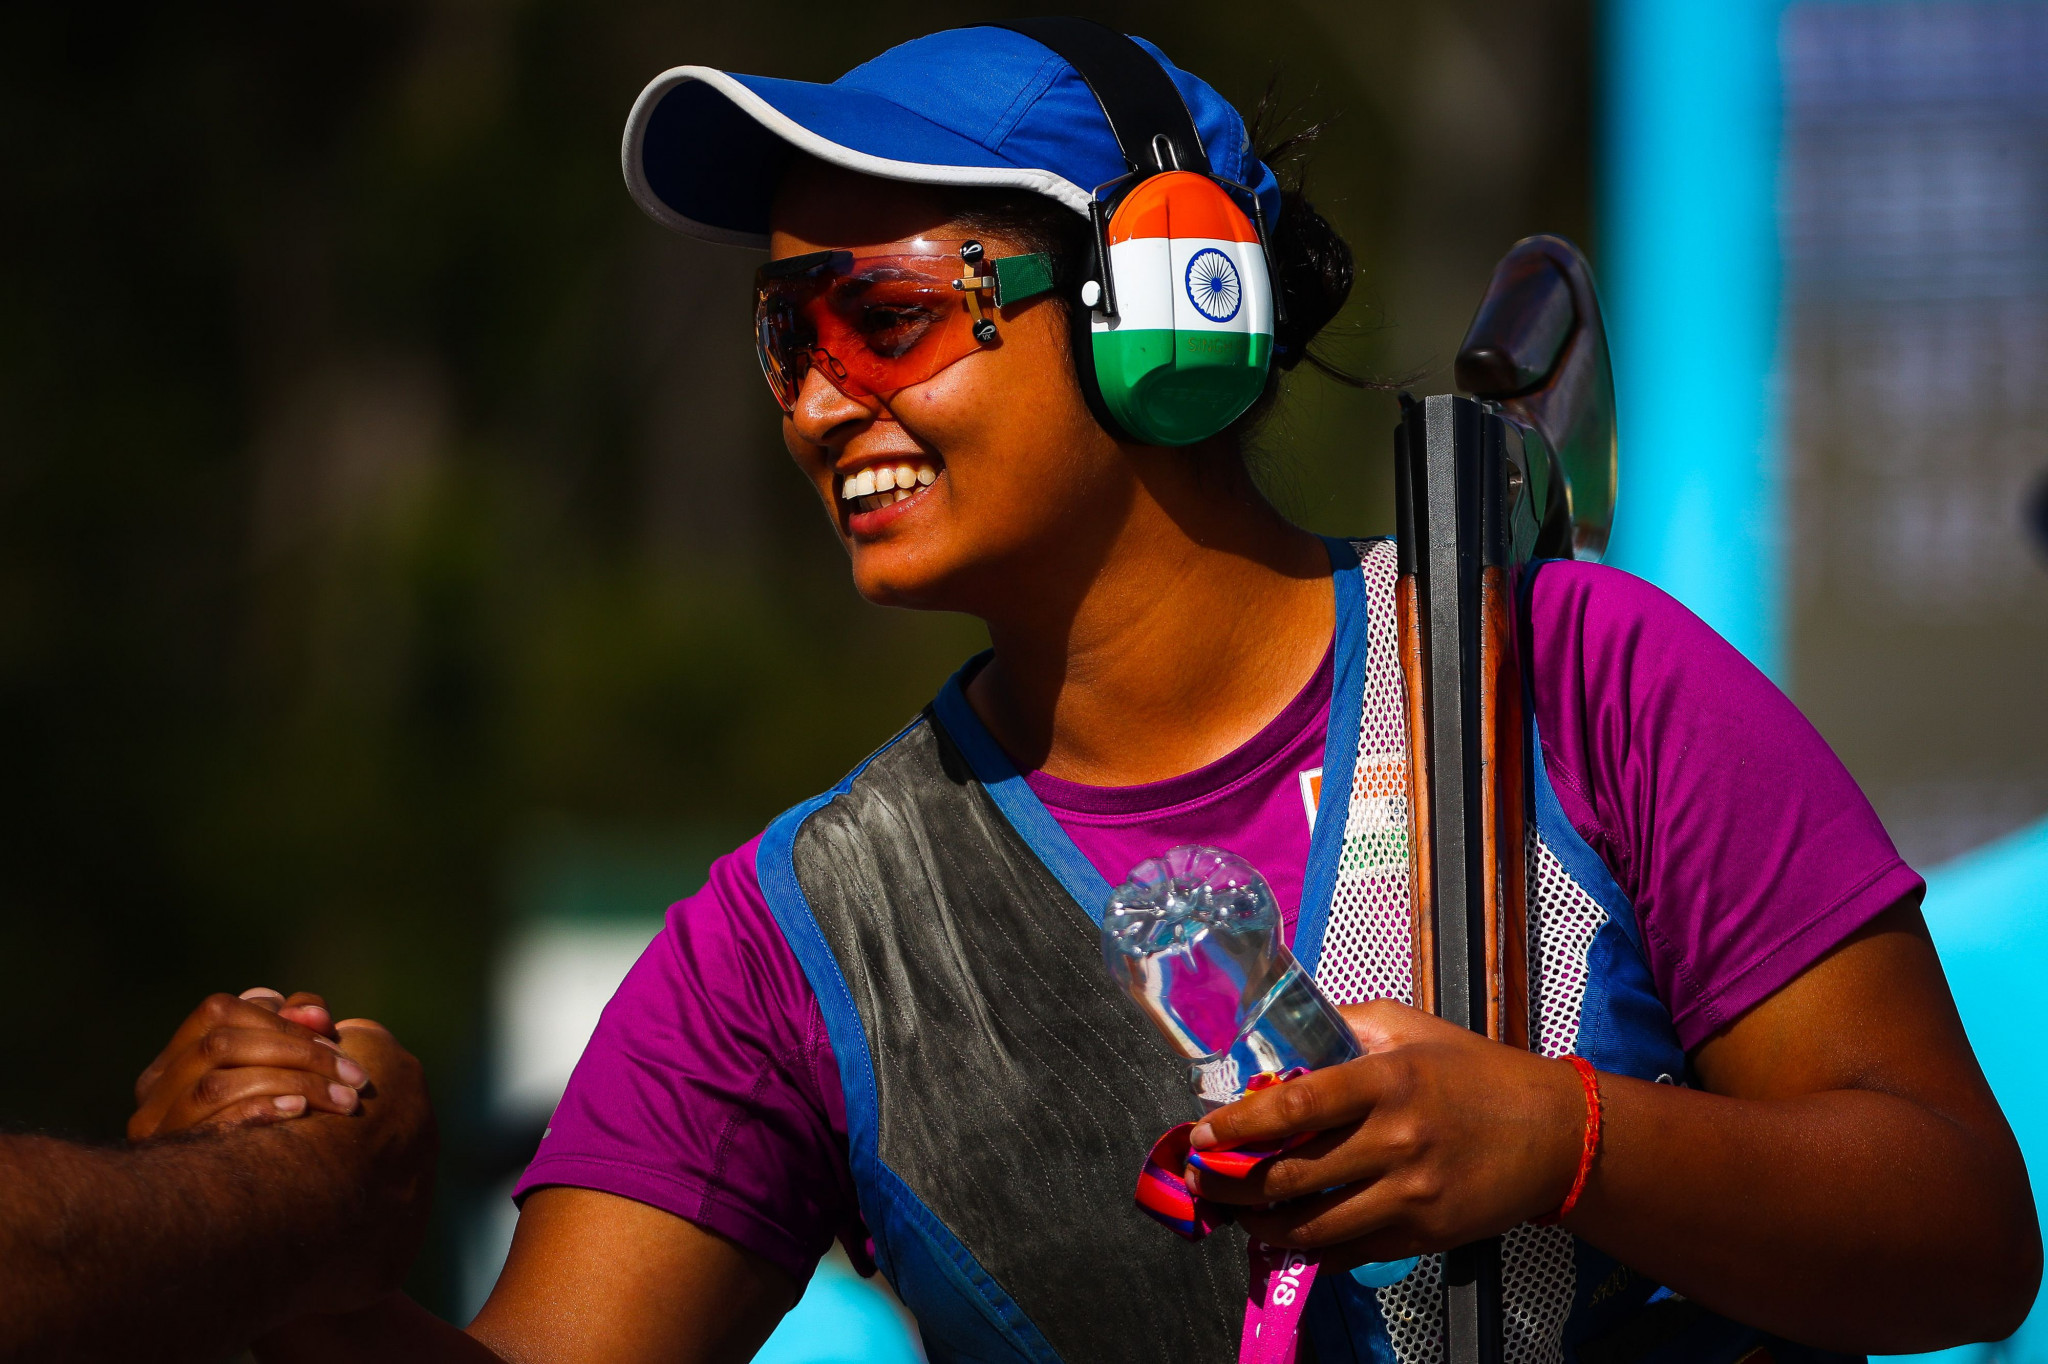 India threatened to boycott Birmingham 2022 over the exclusion of shooting before the CGF said it would consider the country's proposal to include it on the medals table if they hosted the sport, along with archery ©Getty Images